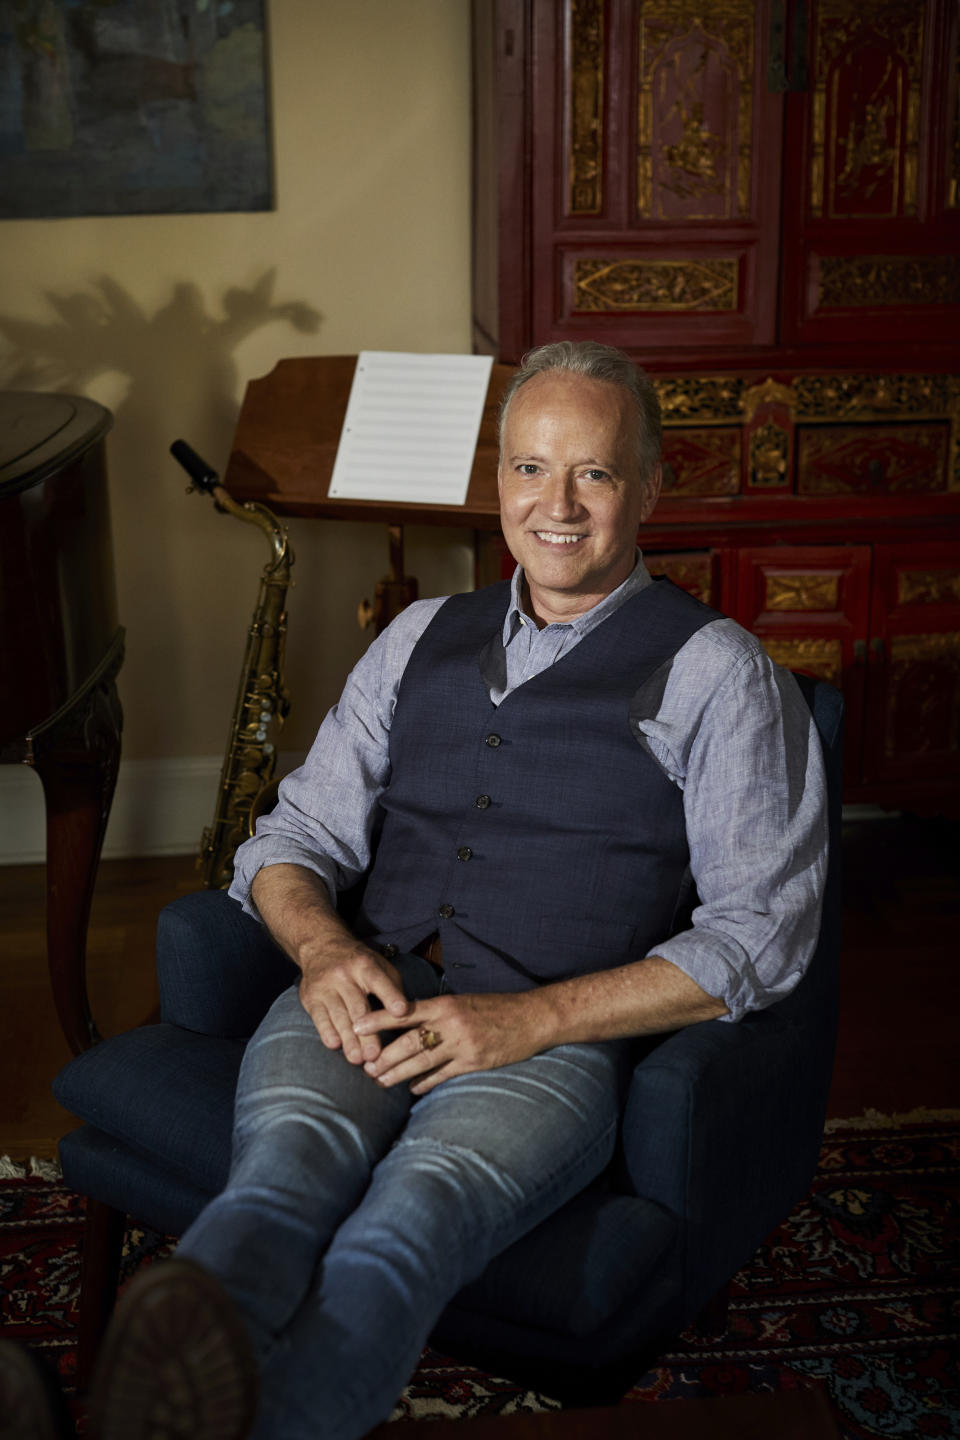 Grammy-winning jazz saxophonist-composer Ted Nash poses for a portrait in New York on May 4, 2021. Nash is releasing an album with actress Glenn Close on Friday. “Transformation: Personal Stories of Change, Acceptance, and Evolution,” is an 11-track spoken word jazz album that tackles heavy topics like race, politics and identity. (Photo by Matt Licari/Invision/AP)